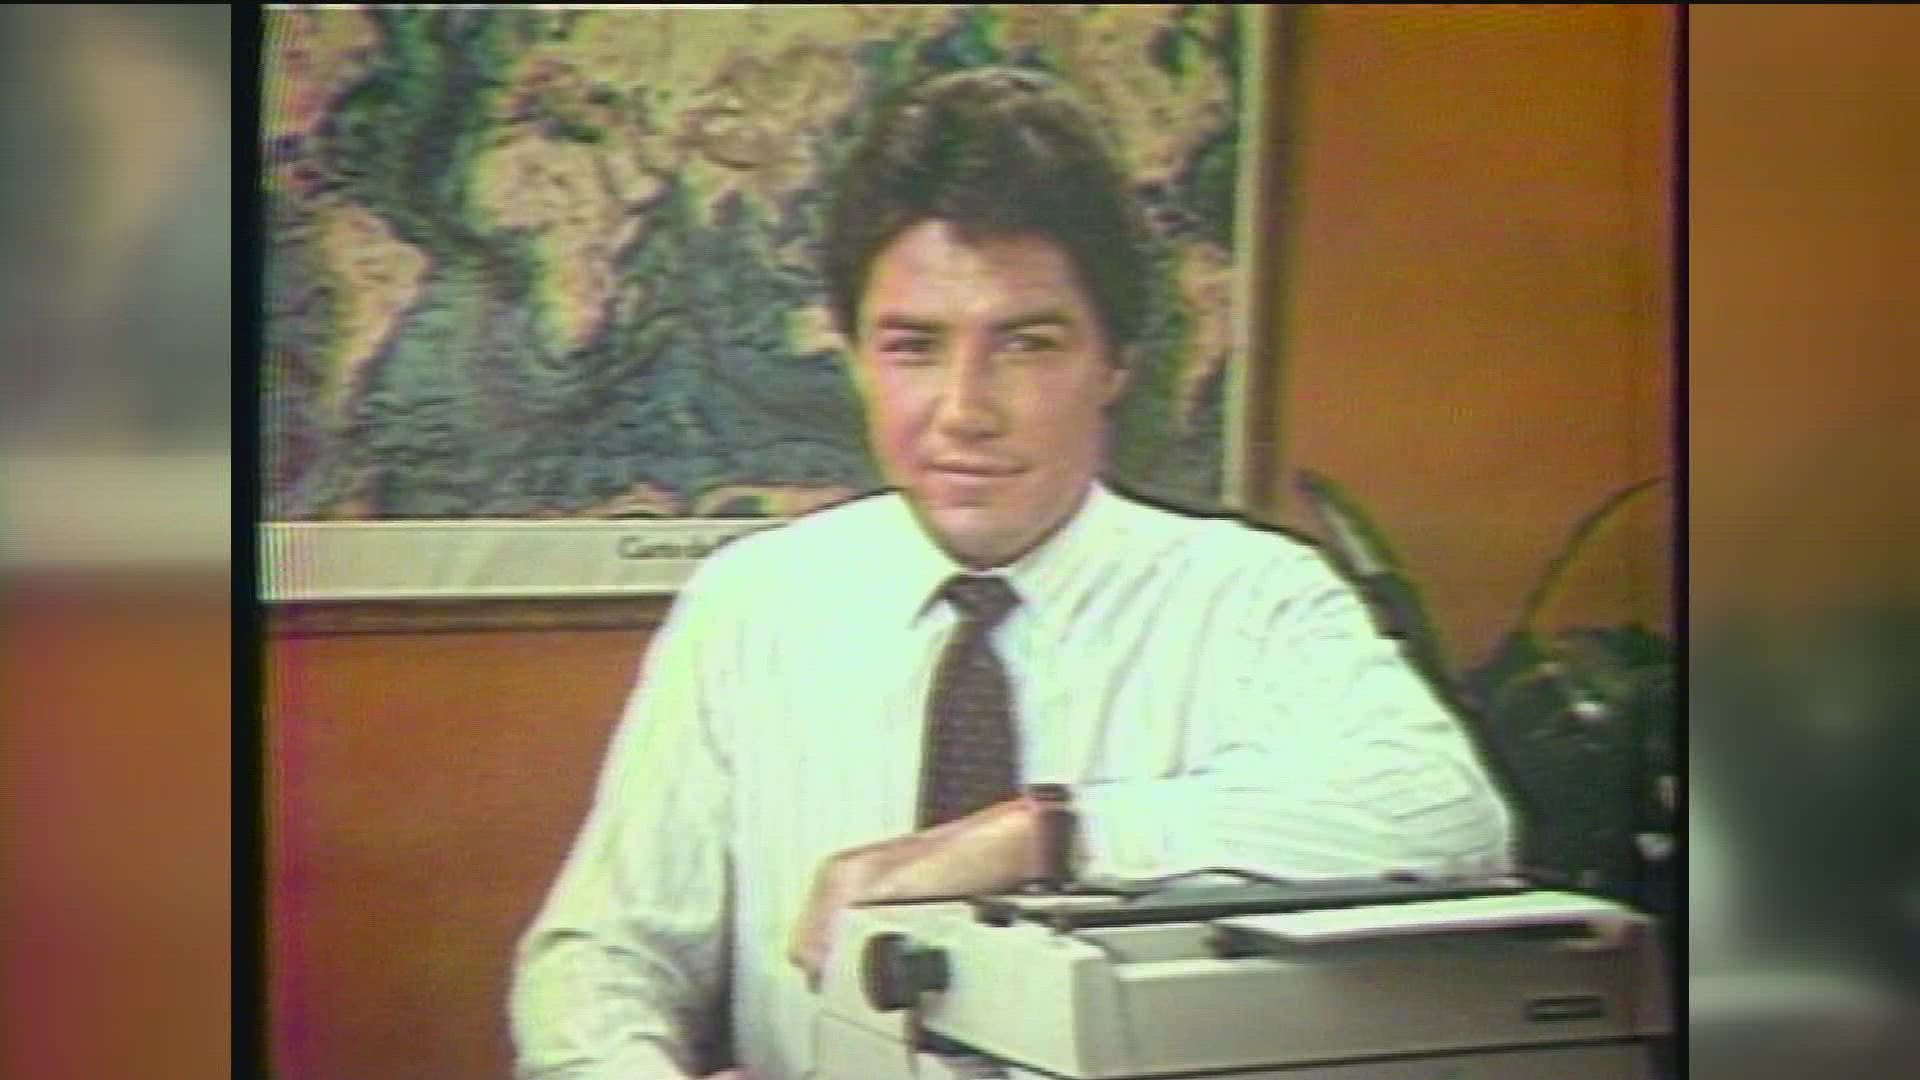 Long-time CBS 8 news anchor, Michael Tuck passed away on Wednesday, Aug. 17 at the age of 76.